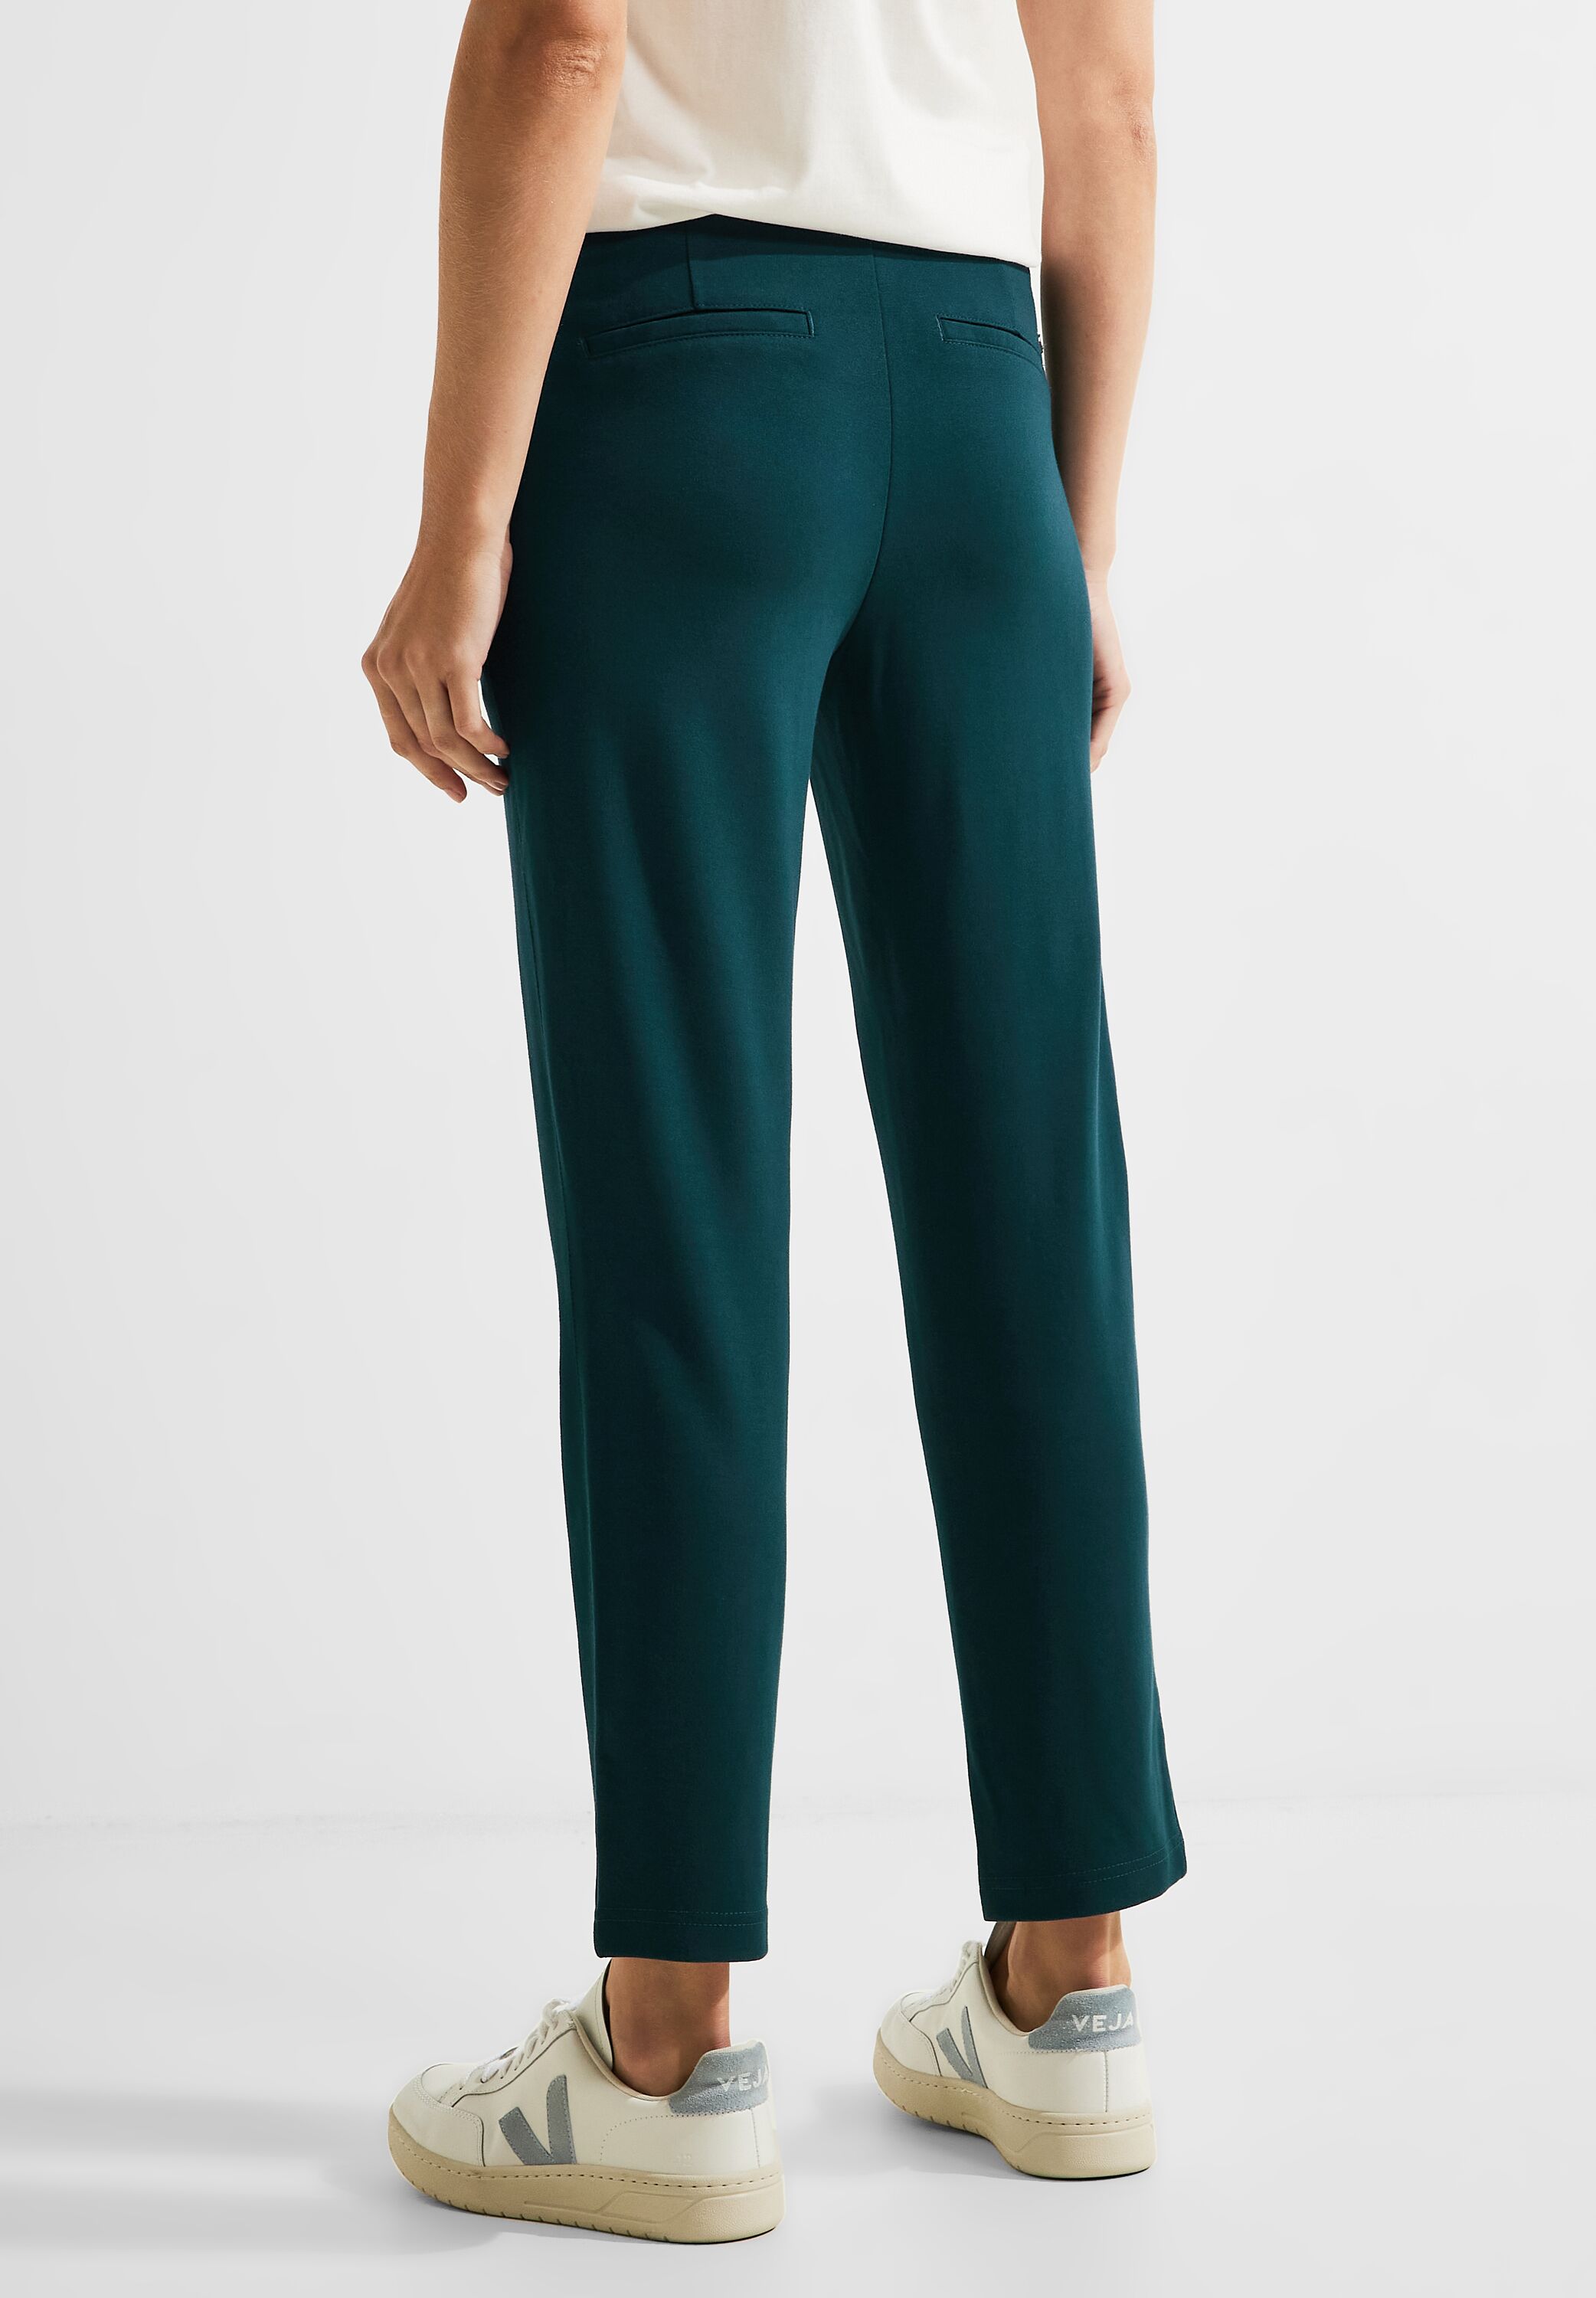 CECIL Joggpant Tracey in im reduziert Green Deep Lake - B376689-14926 CONCEPT SALE Mode